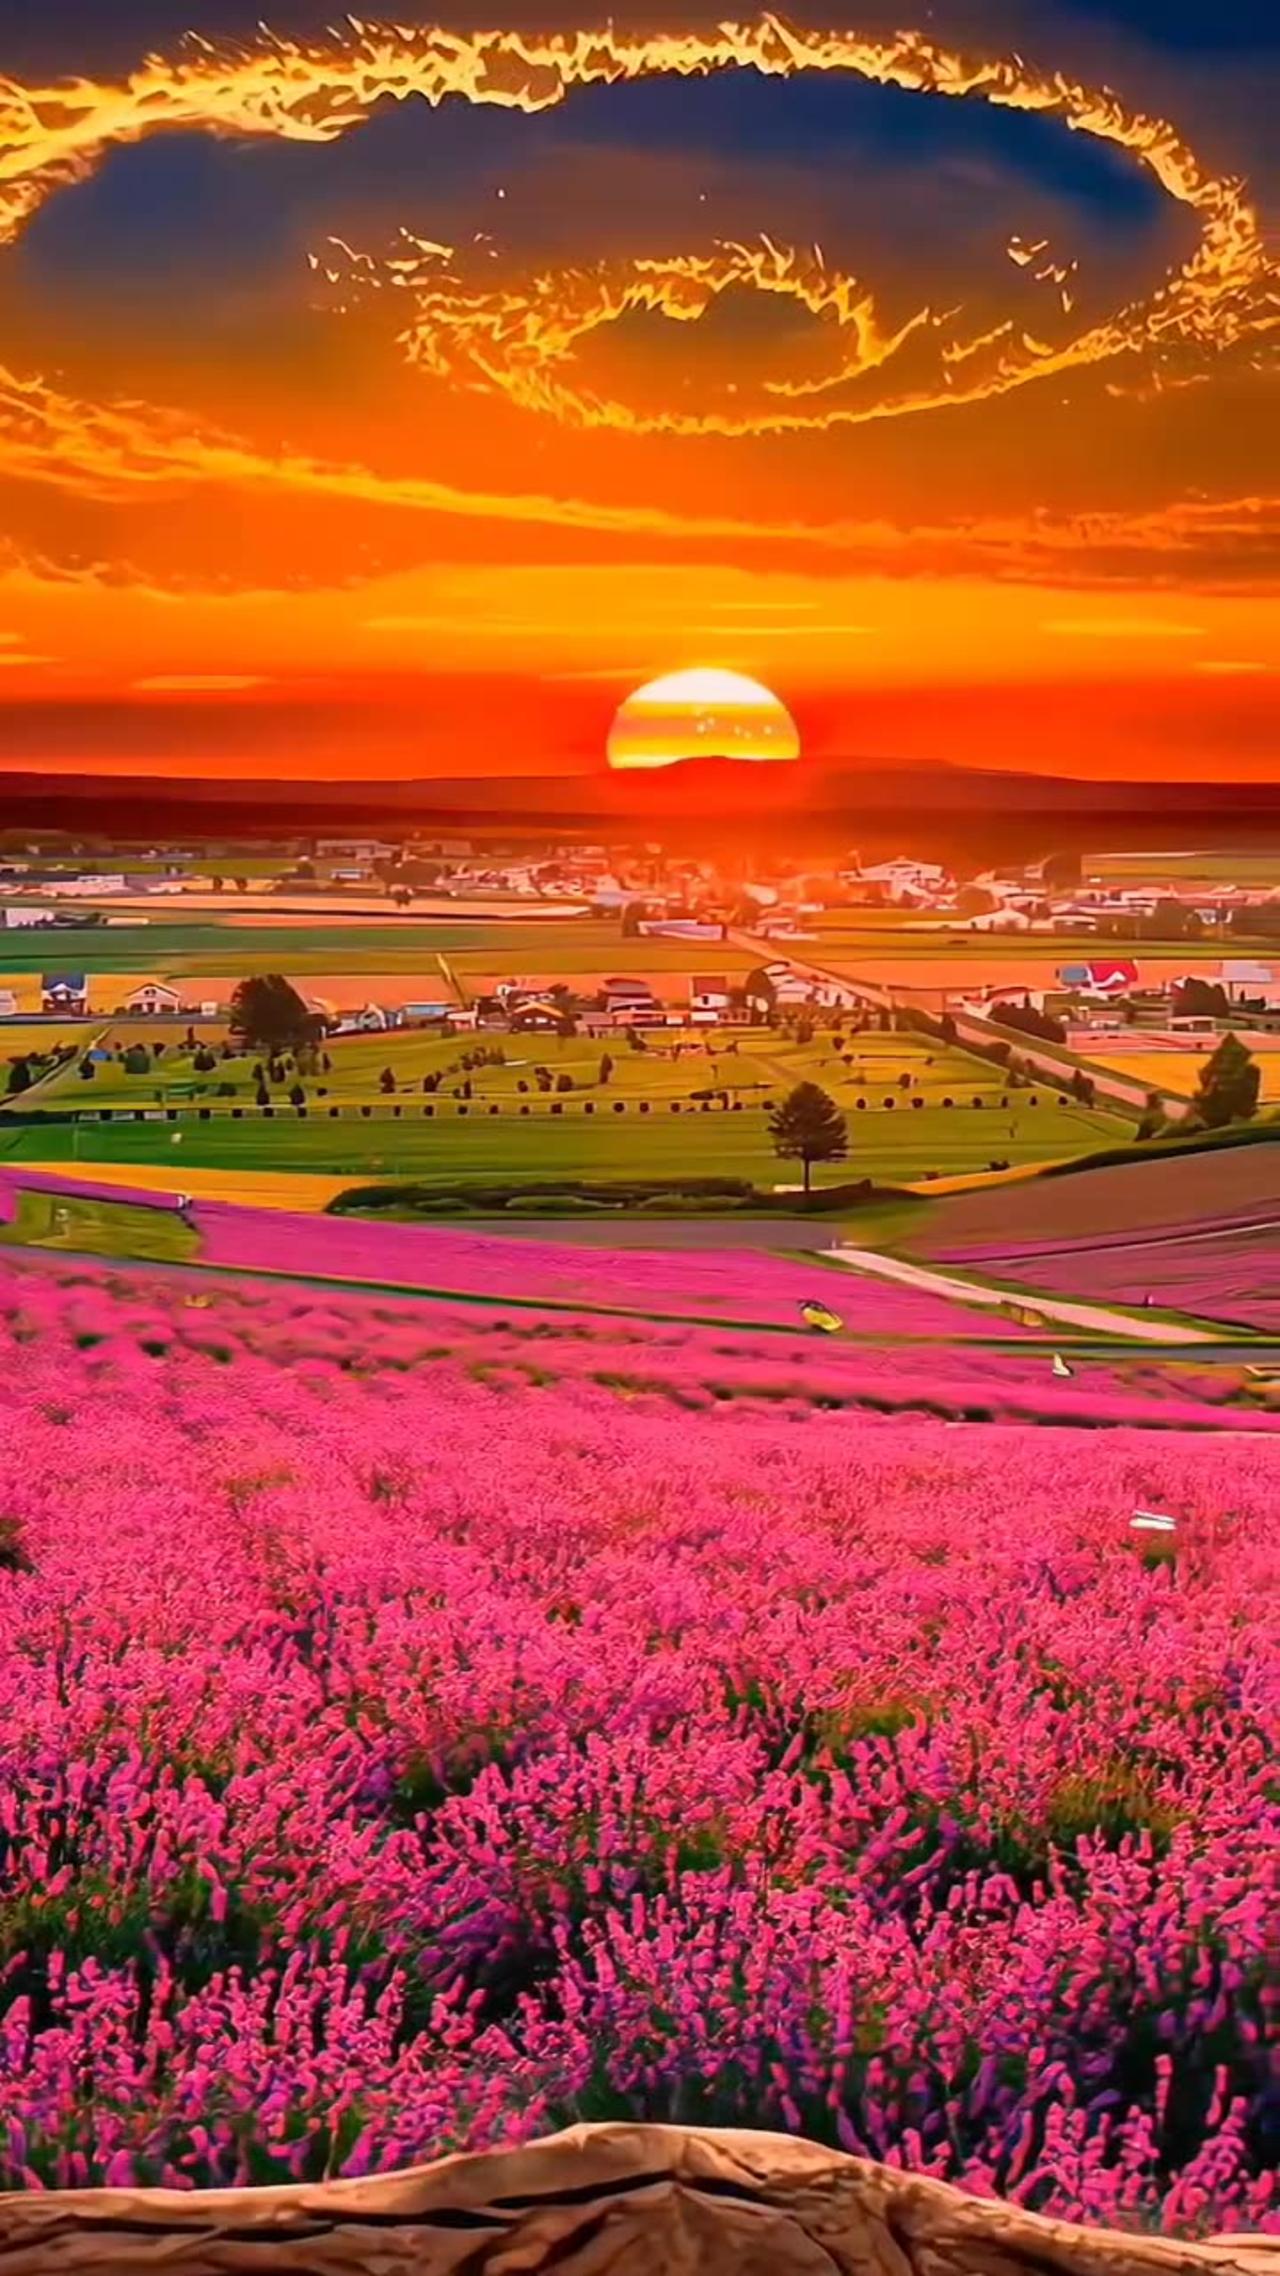 Sea of flowers and sunset